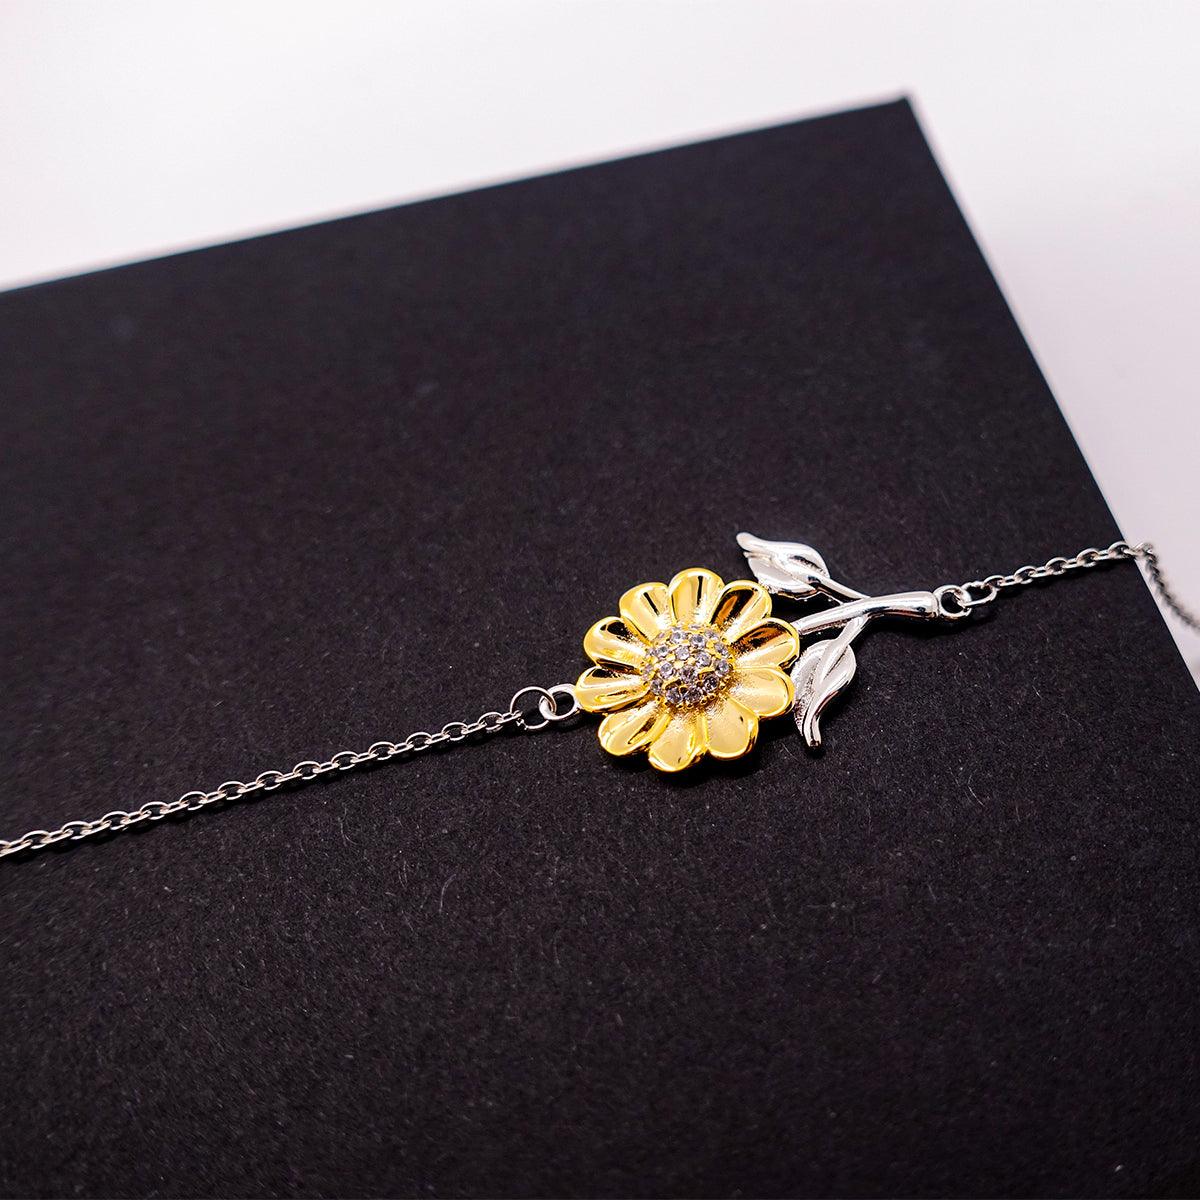 Administrative Assistant Sunflower Bracelet - Thanks for being who you are - Birthday Christmas Jewelry Gifts Coworkers Colleague Boss - Mallard Moon Gift Shop